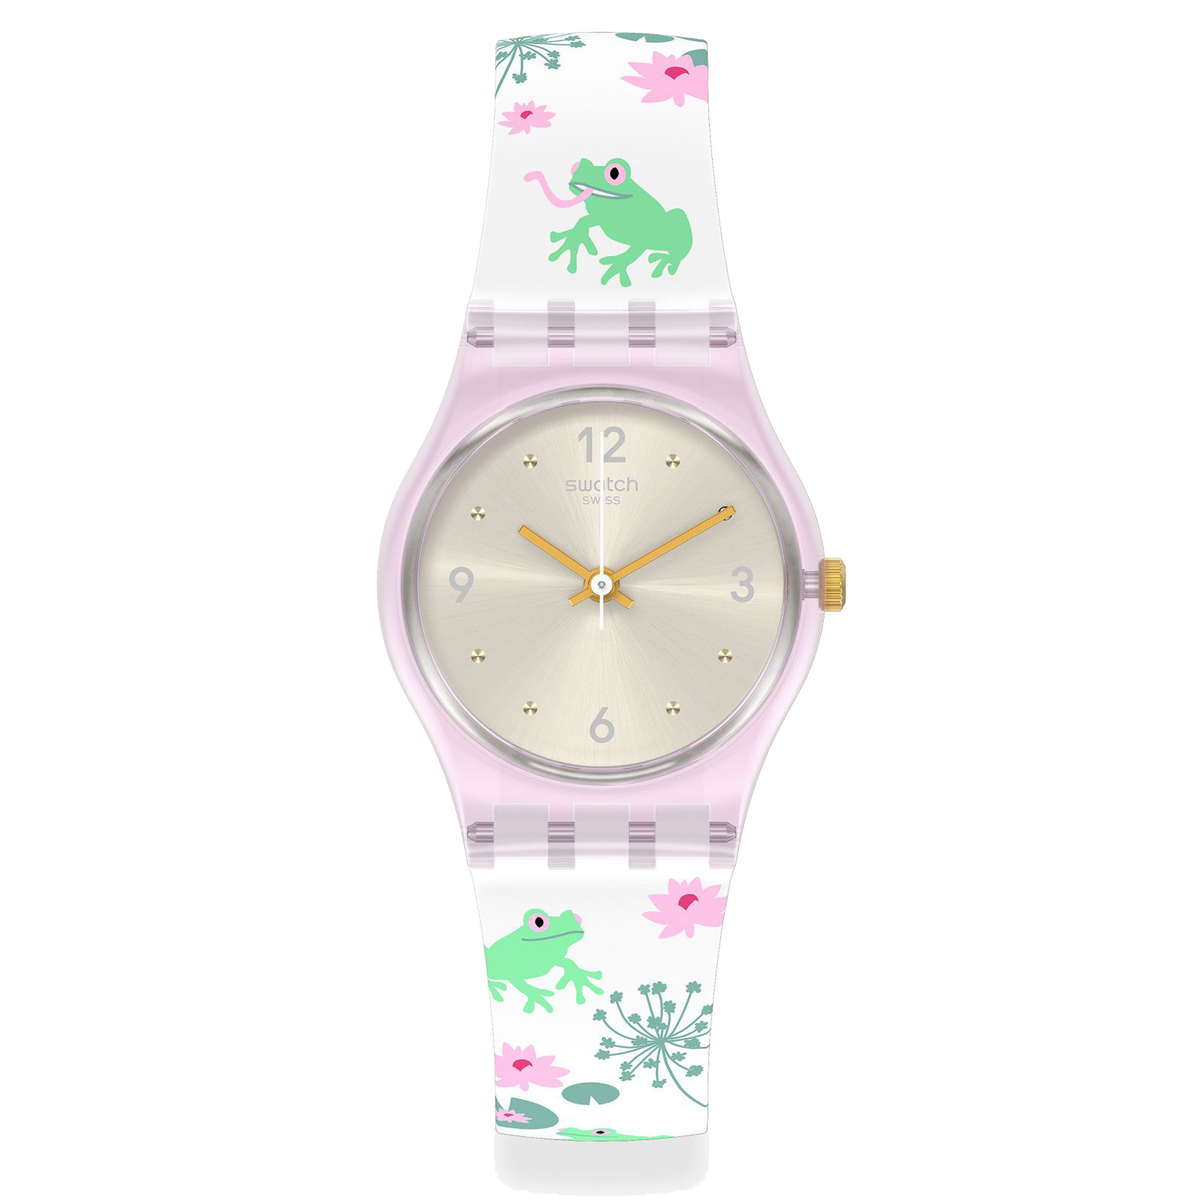 Swatch Watch 25mm - Enchanted Pond